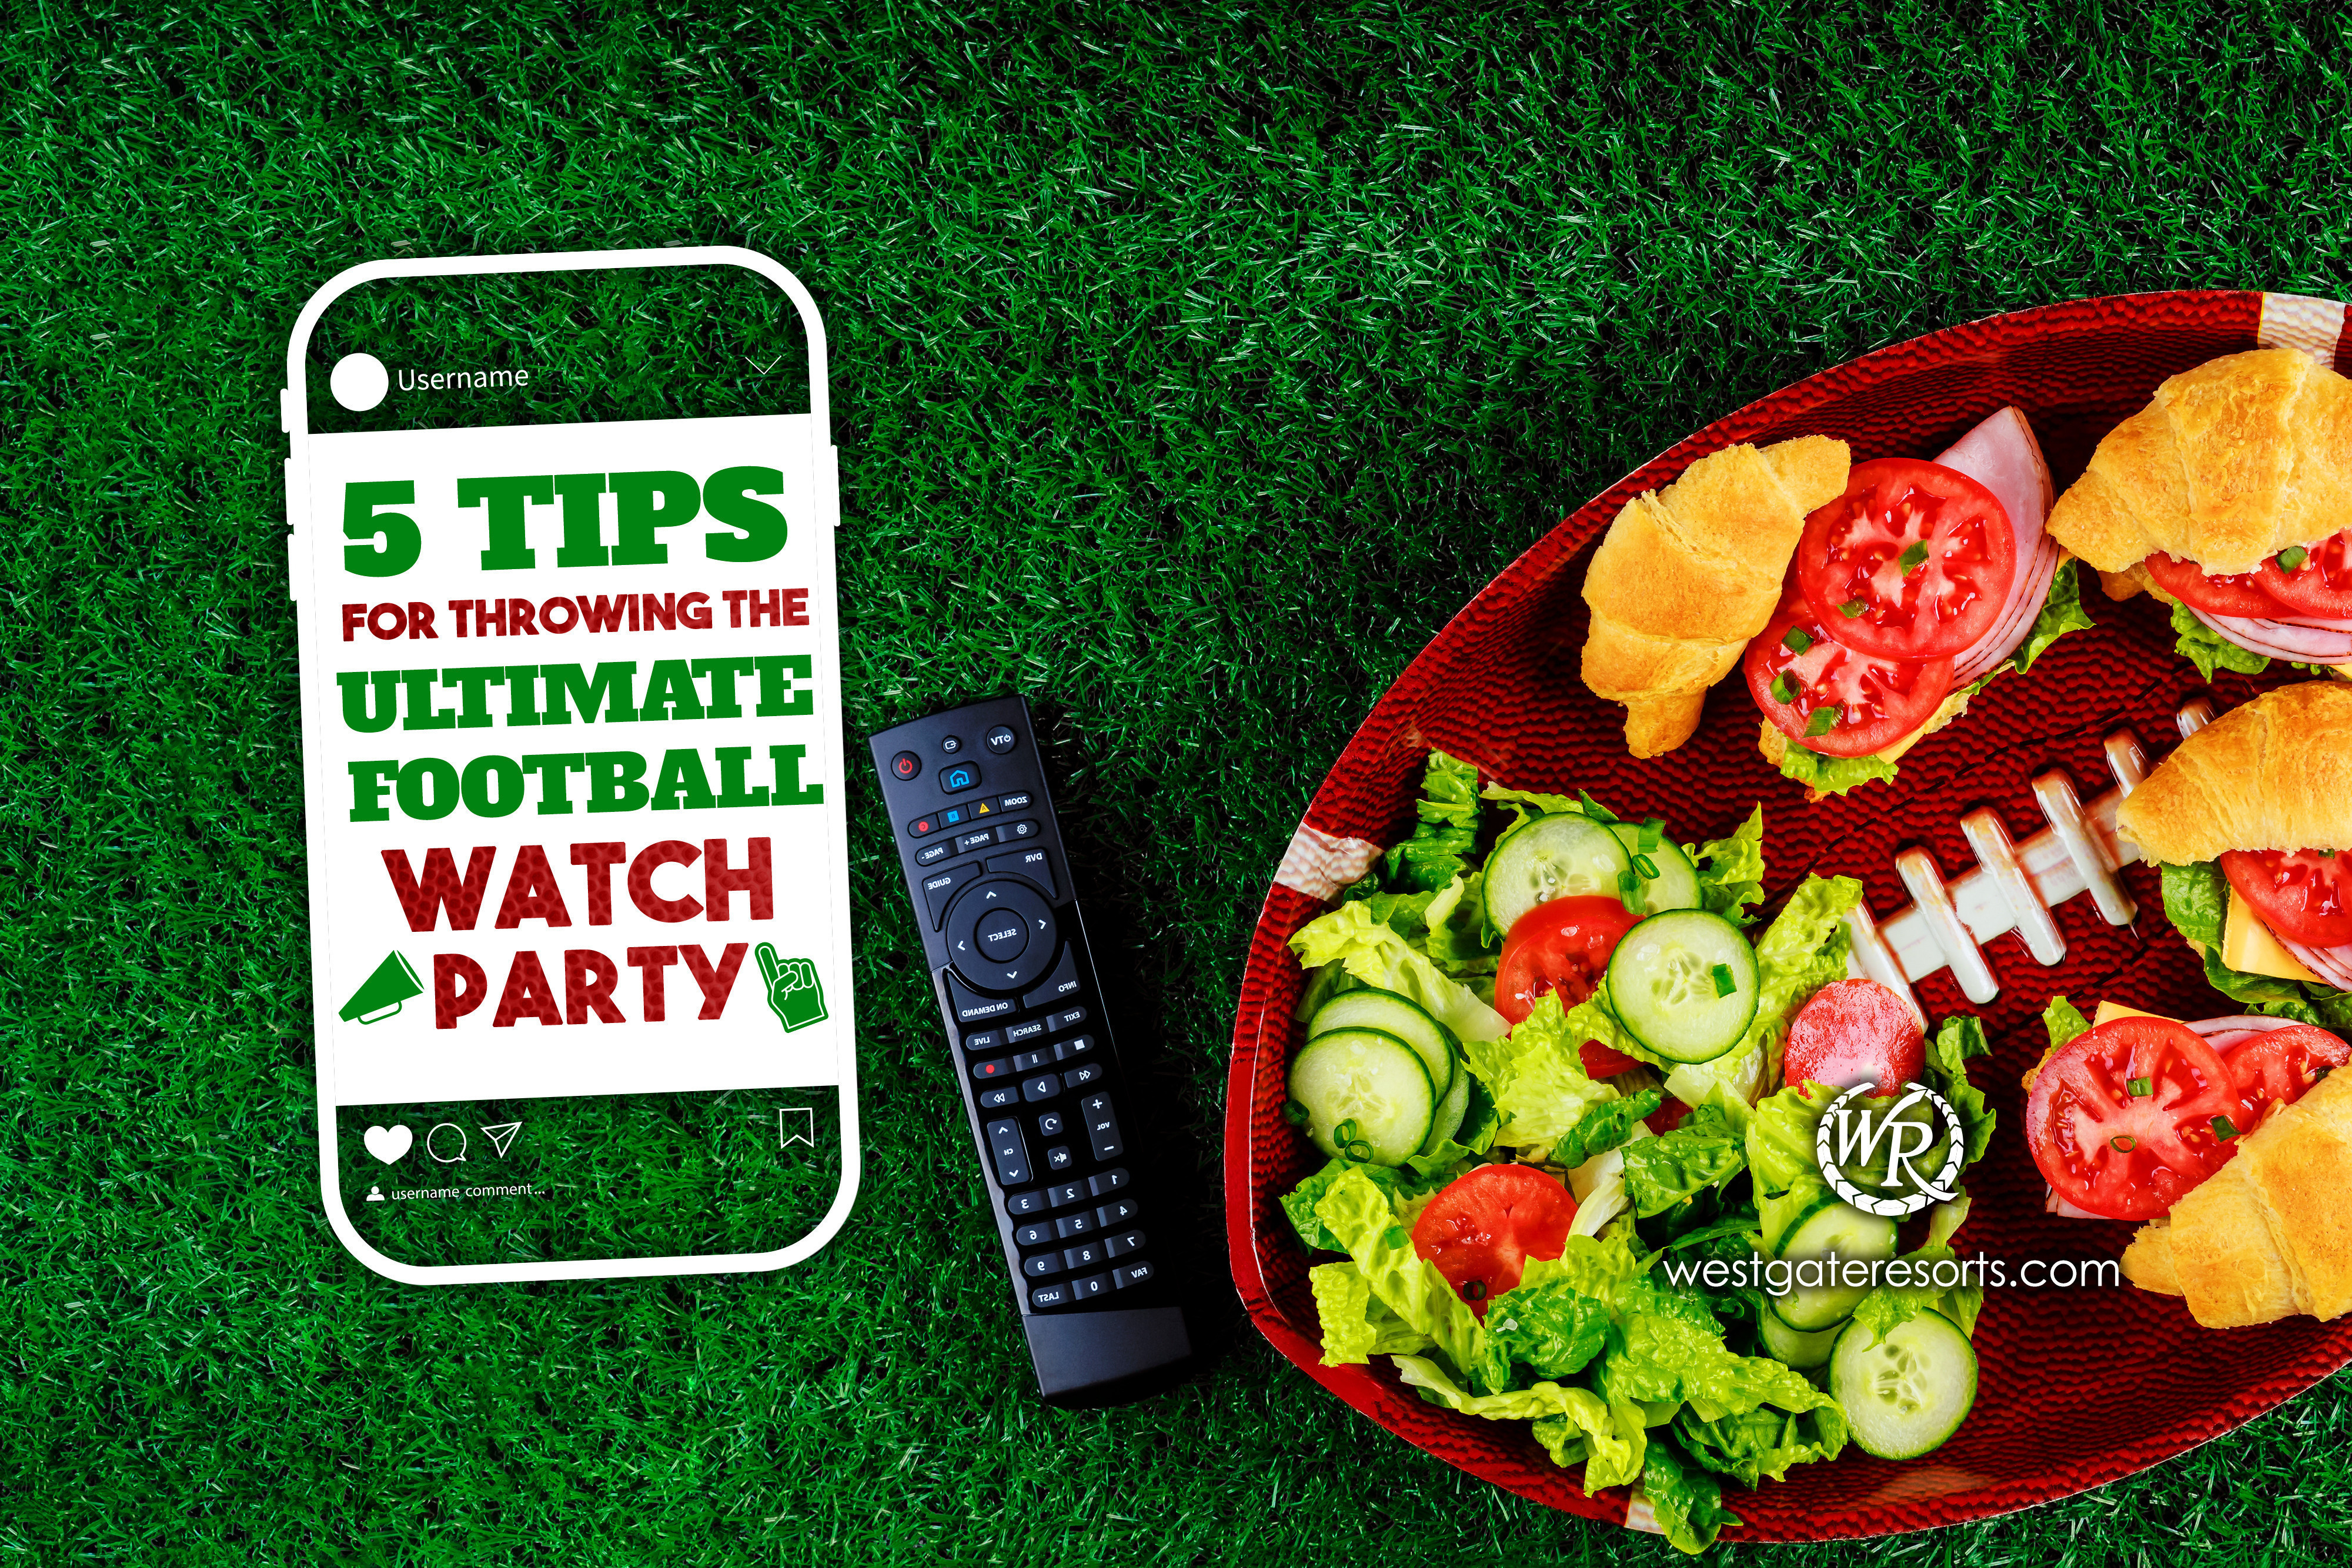 5 Tips for Throwing the Ultimate Football Watch Party!